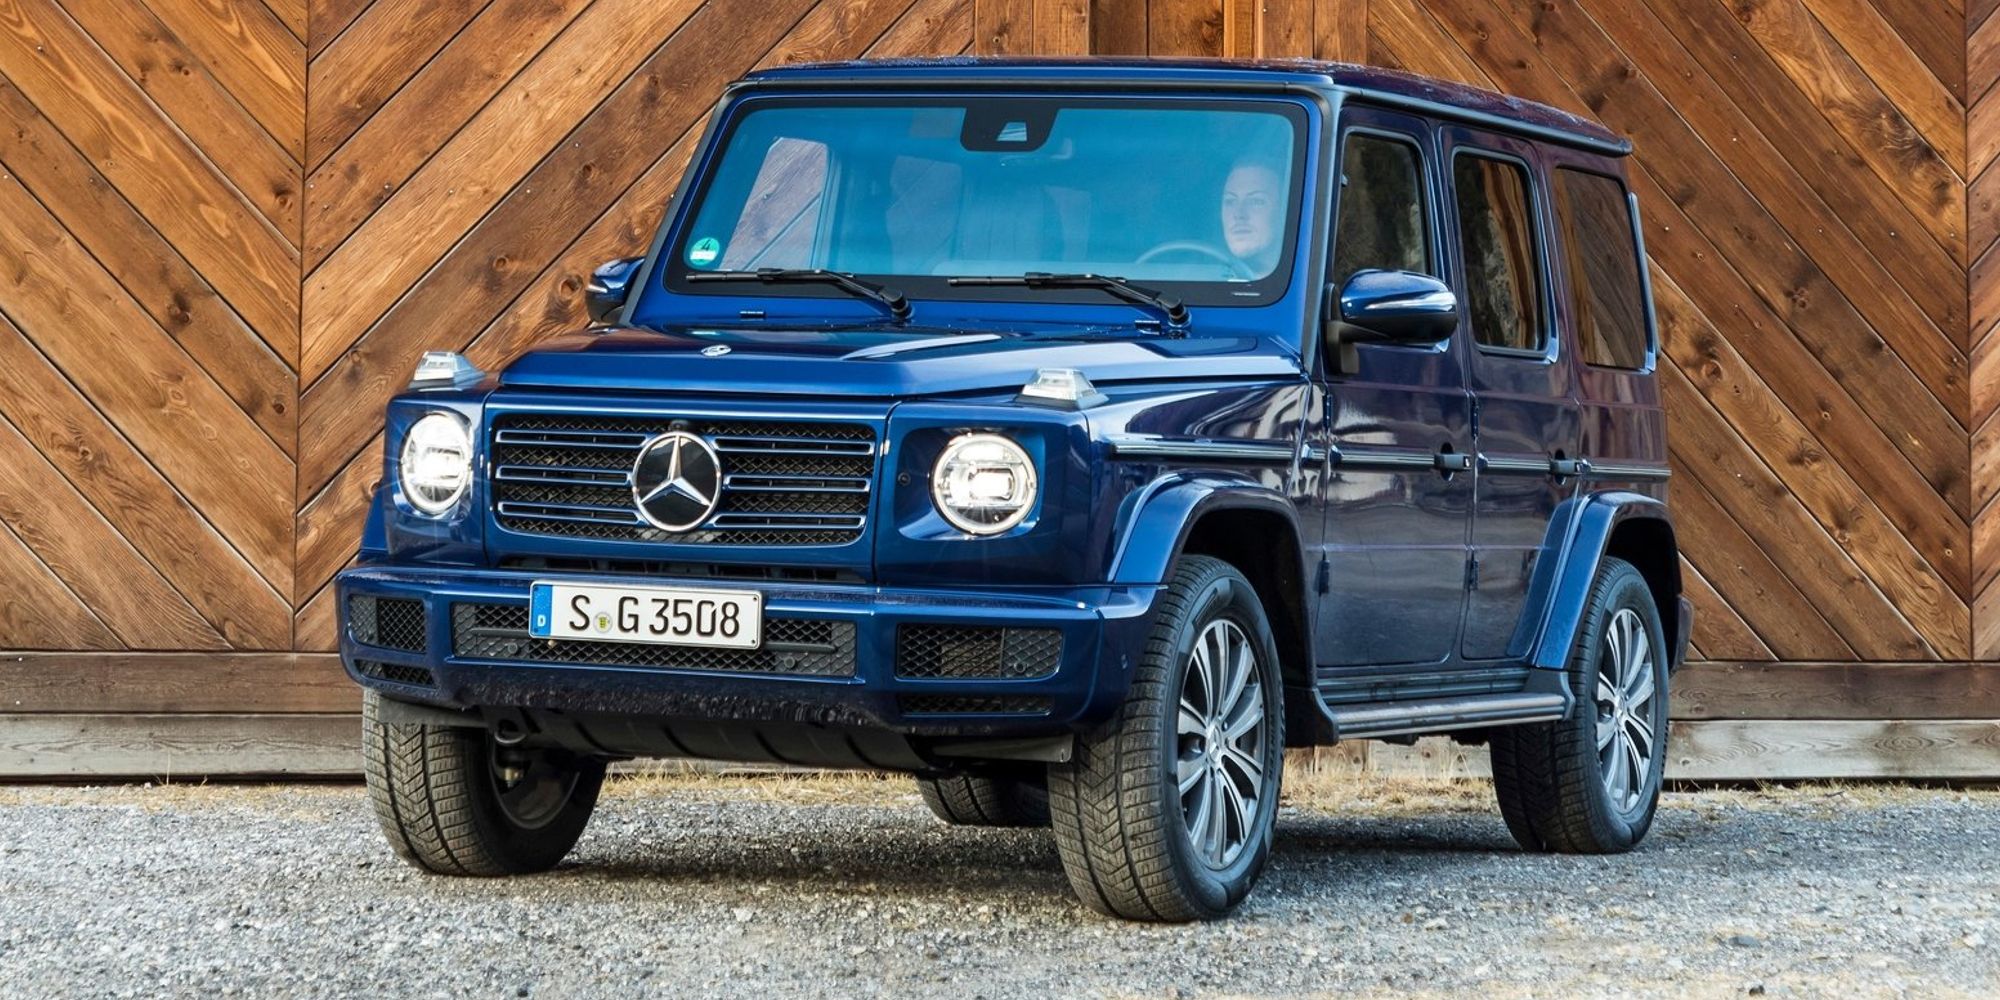 The front of the new G-Wagen